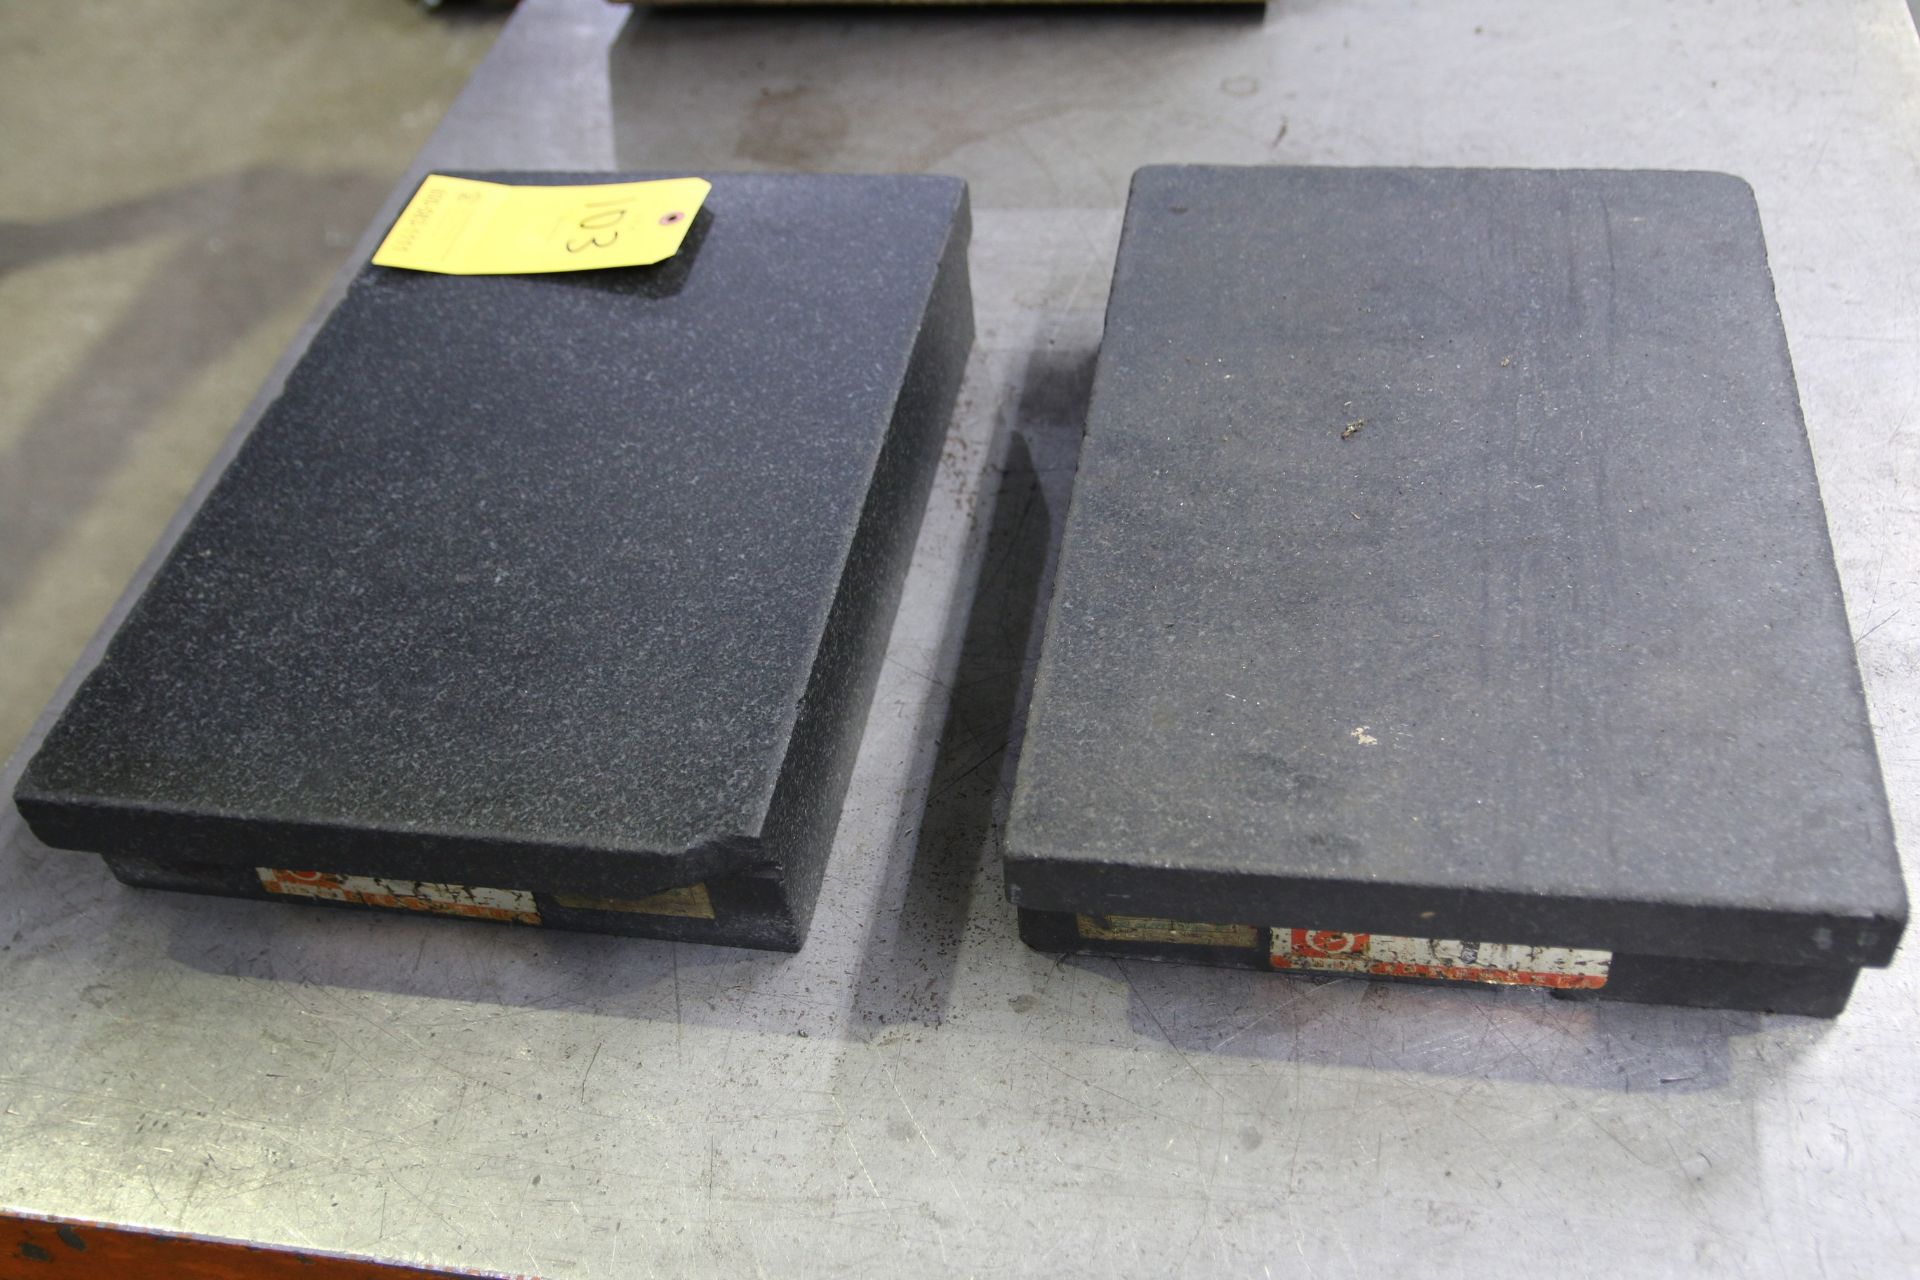 Pair of Granite Surface Plates Each Measure 11.5" x 17.5" x 3" H - Image 2 of 2